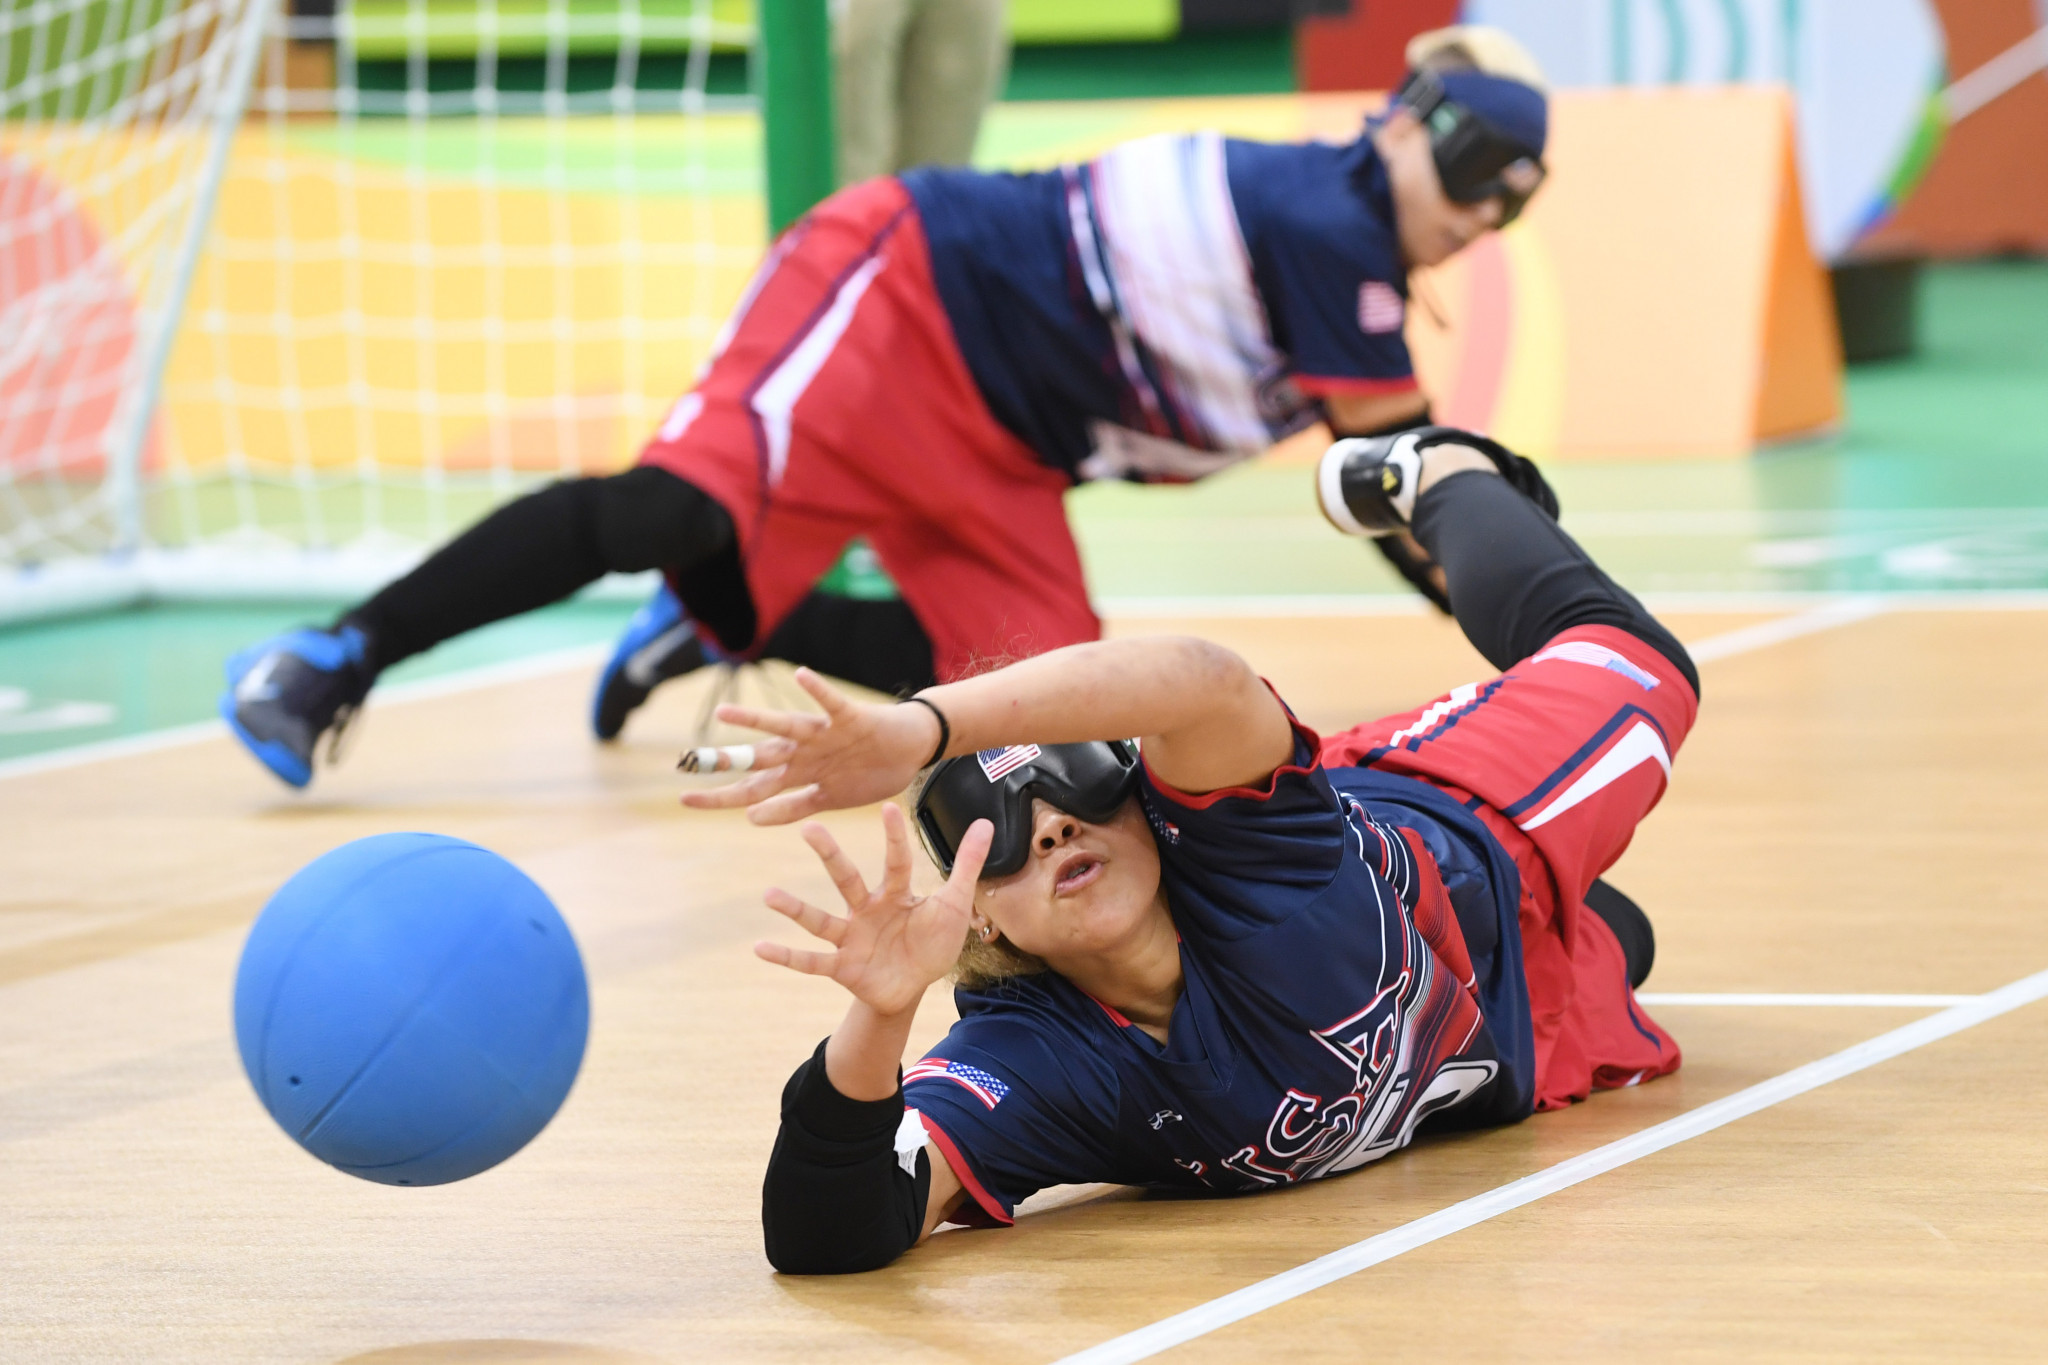 Ten men's teams and ten women's will compete in the Tokyo 2020 goalball tournaments ©Getty Images